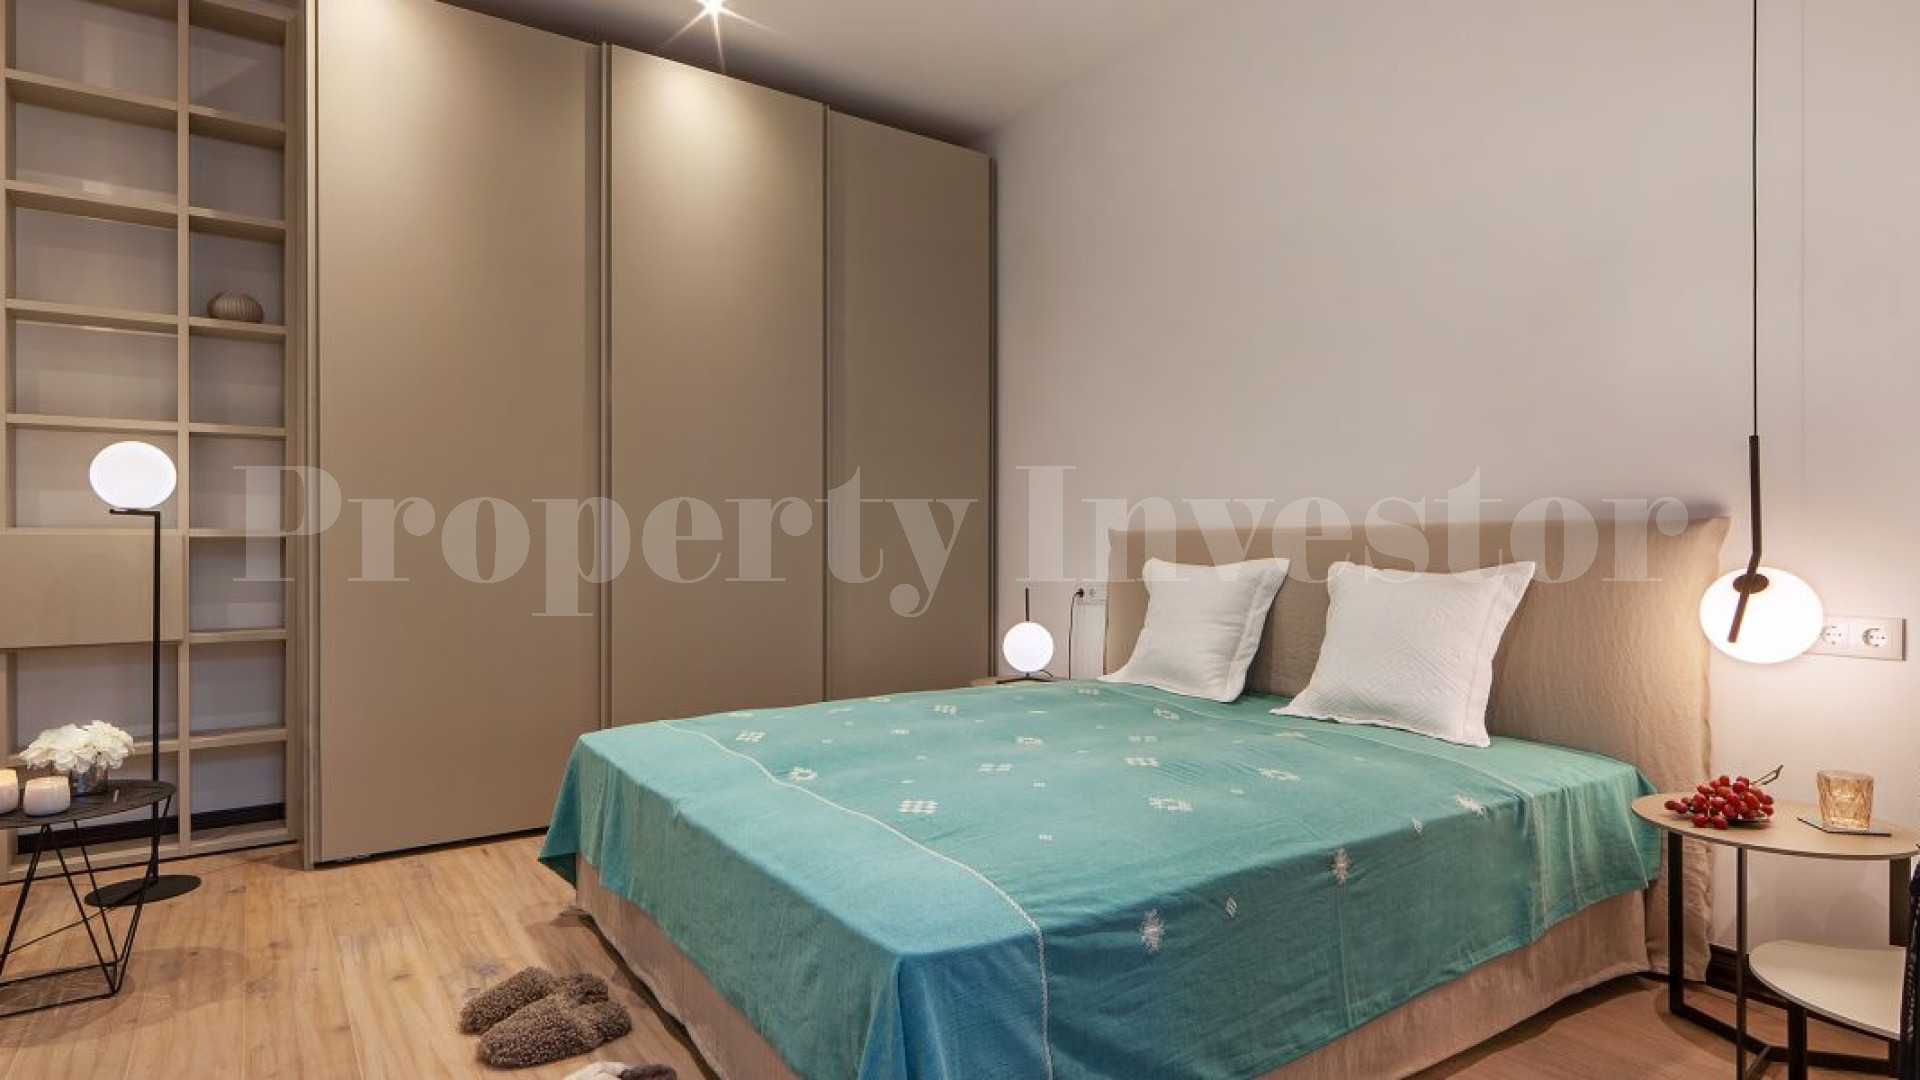 Luxurious 3 Bedroom Apartment in the Best location in Palma de Mallorca